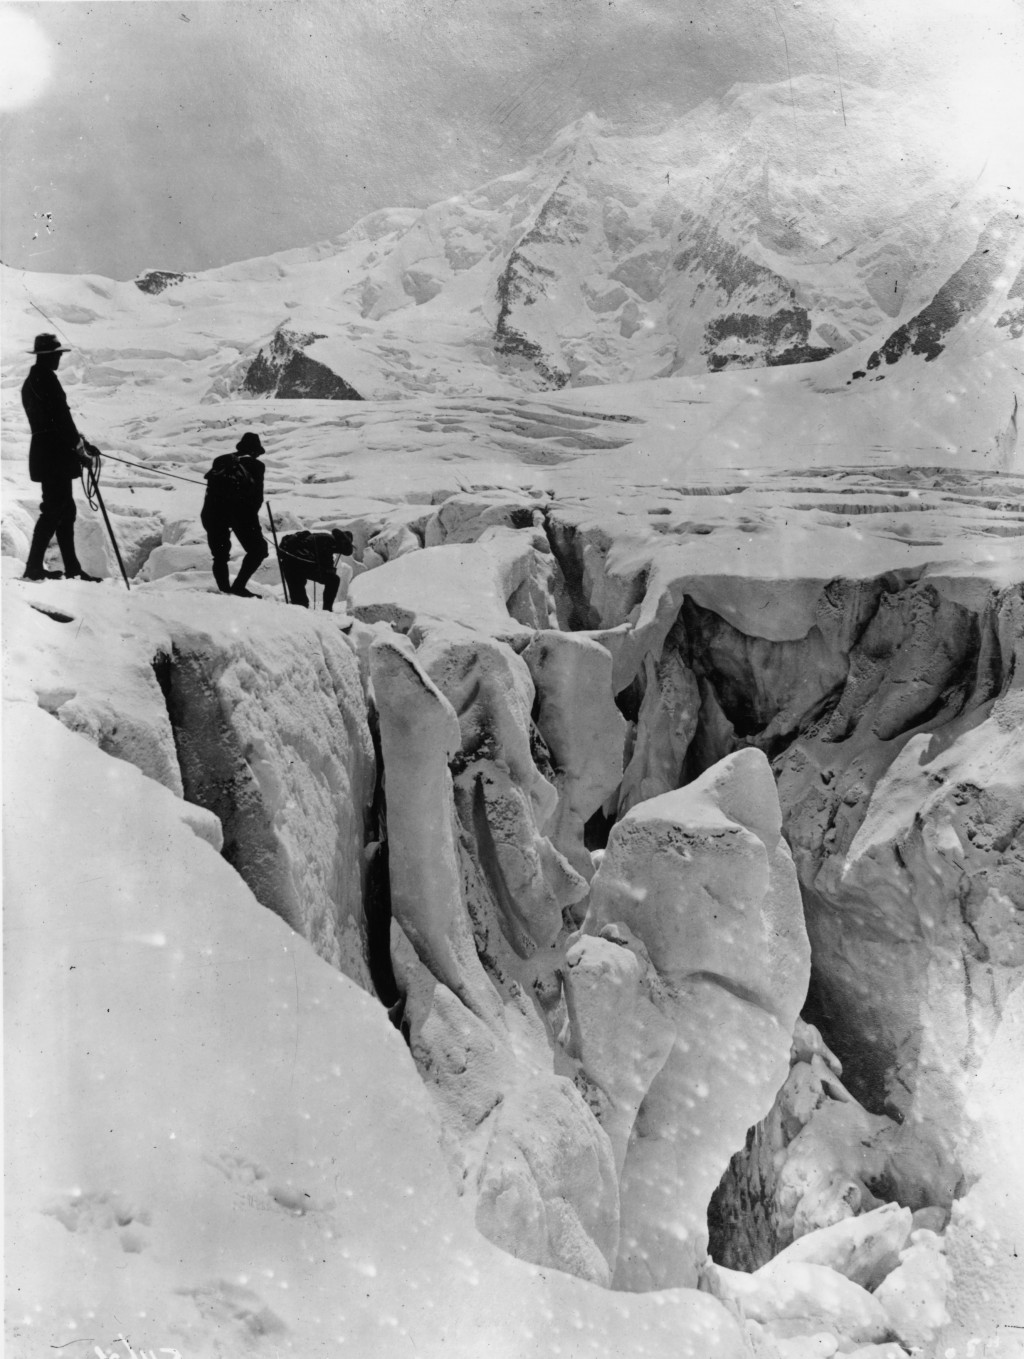 December 1910:  Three mountaineers crossing a crevsasse on the Pers Glacier in the Alps.  (Photo by Topical Press Agency/Getty Images)